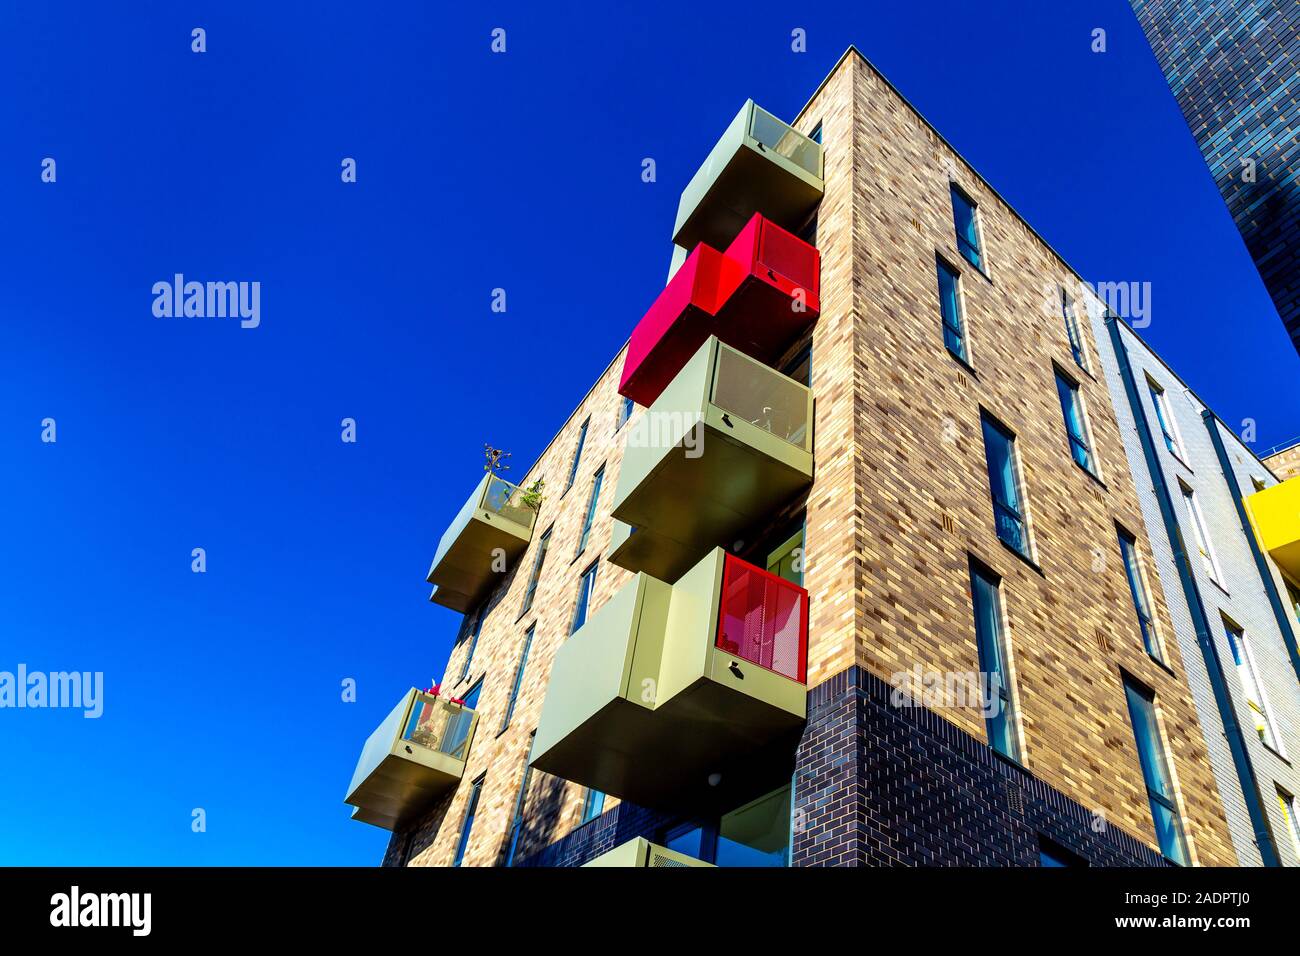 Exterior of residential building, London, UK Stock Photo